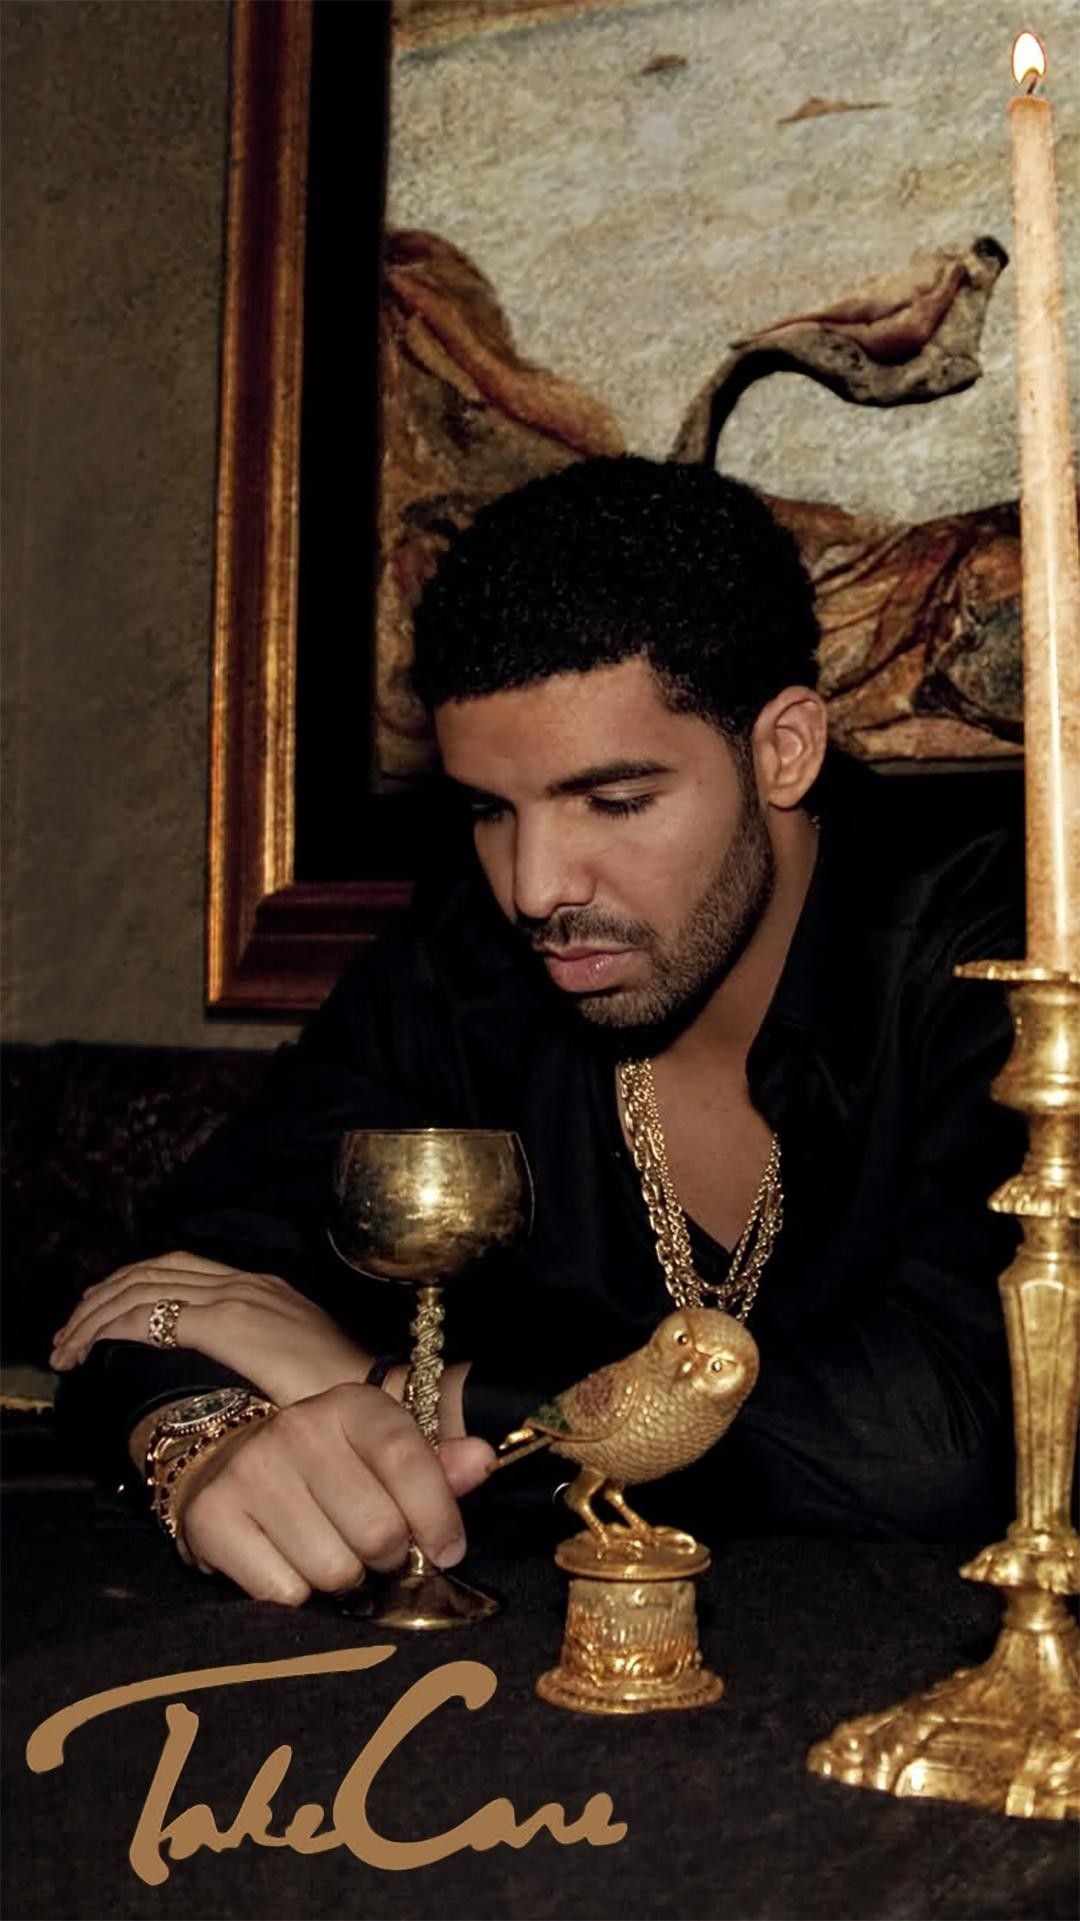 IPhone wallpaper of Drake sitting at a table with a wine glass and a candle. - Drake